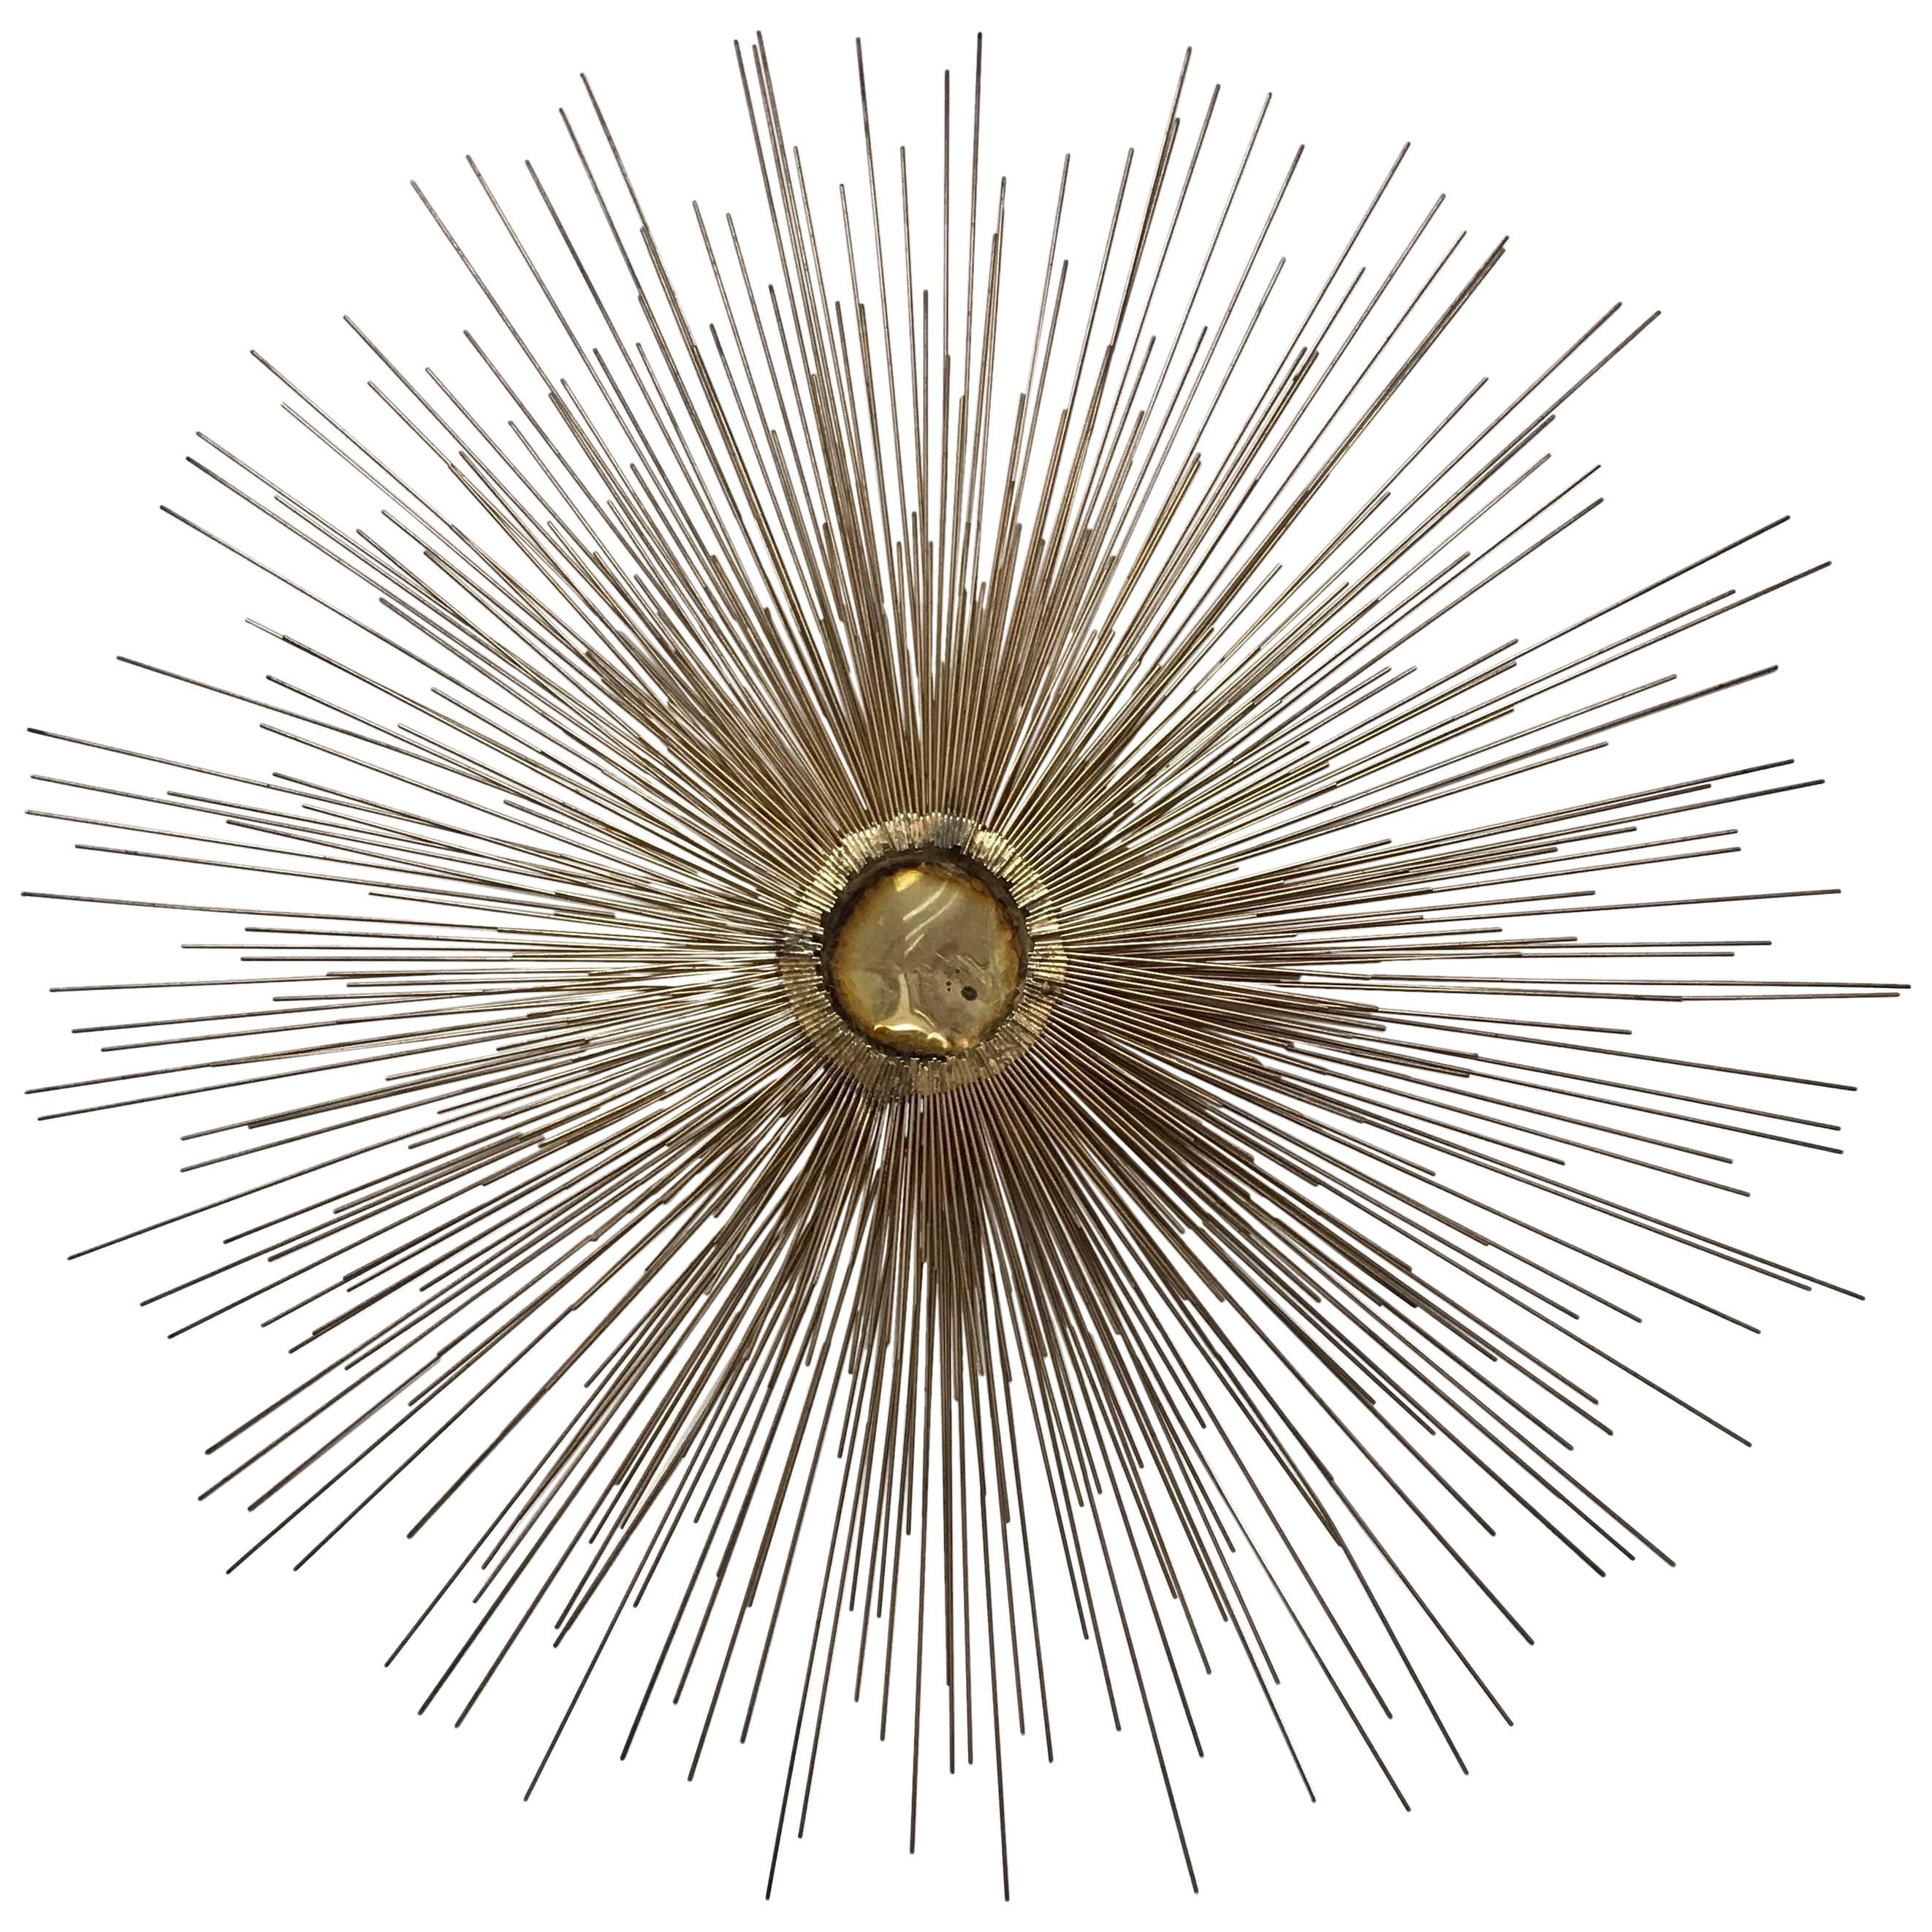 Midcentury Brass and Copper Starburst Sculpture Attributed to C. Jere